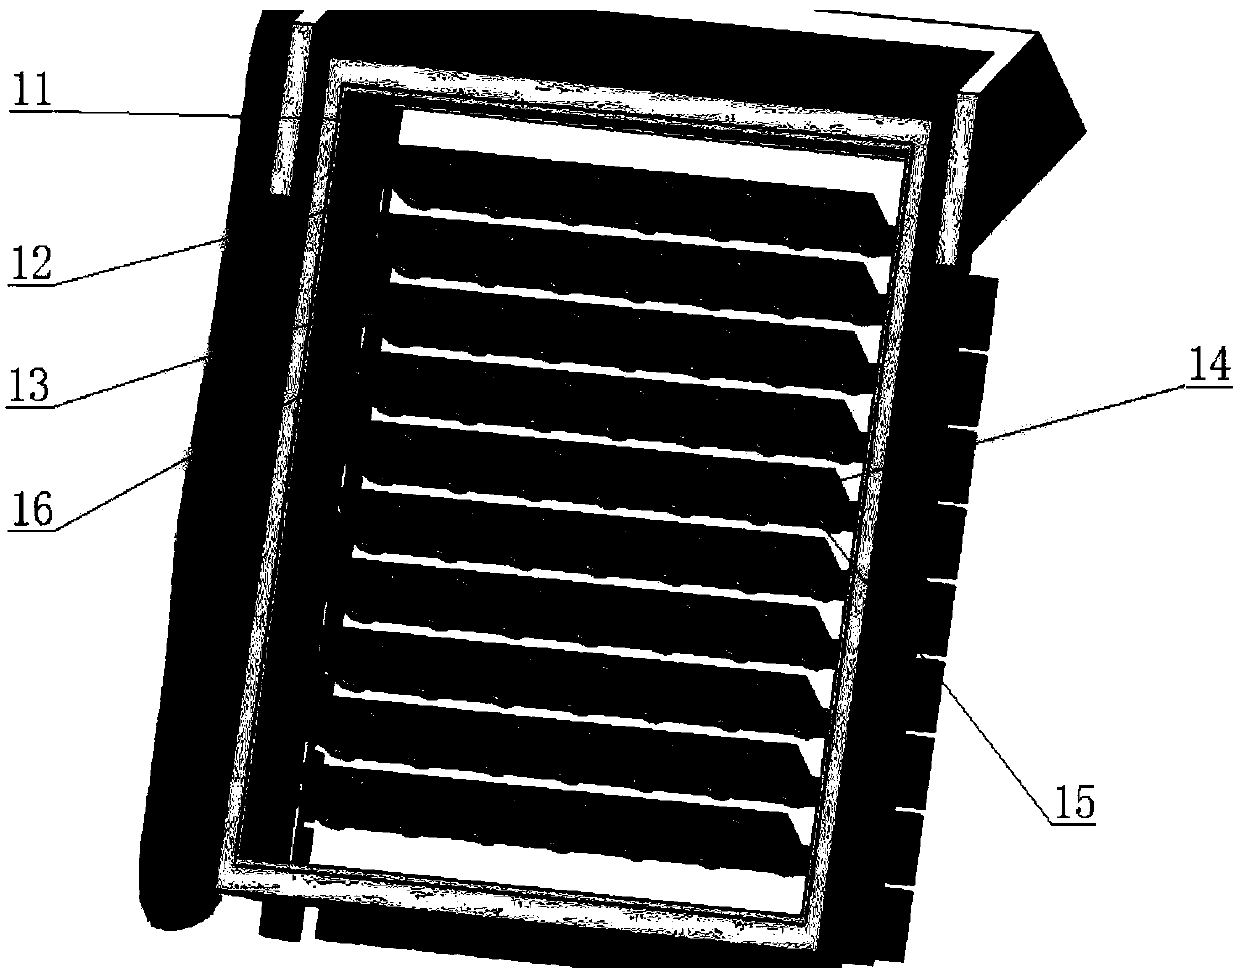 A multifunctional louvered solar heat collection system